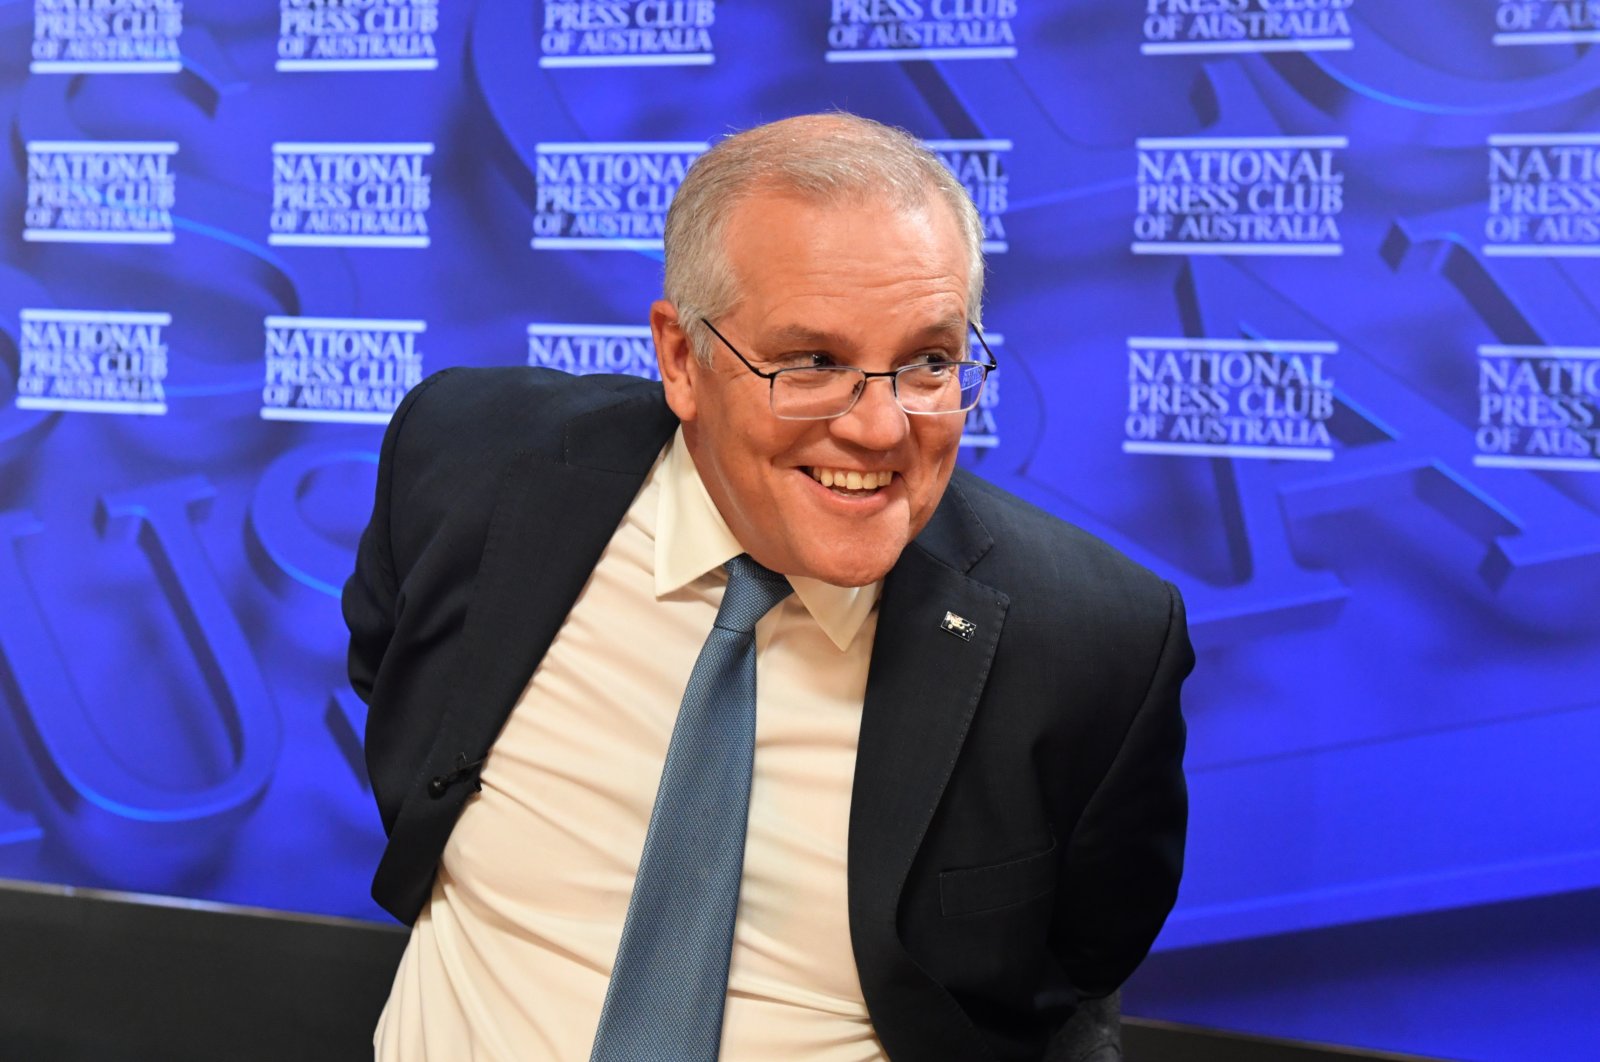 Australian Prime Minister Scott Morrison looks on during an event at the National Press Club in Canberra, Australia, Feb. 1, 2022. (EPA Photo)